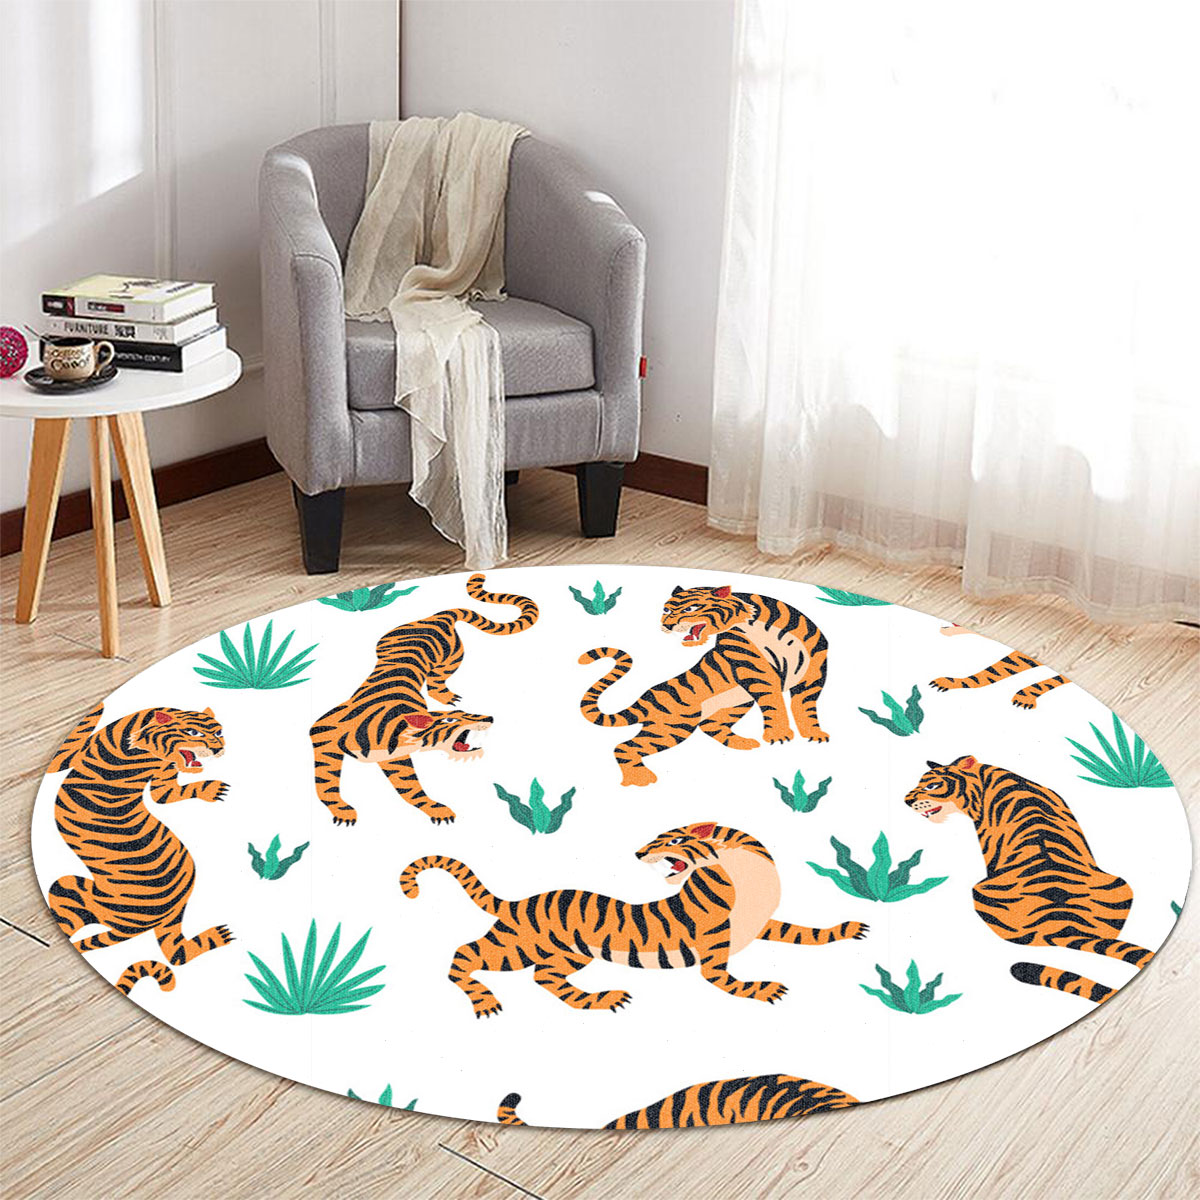 Tiger And Grass Round Carpet 6